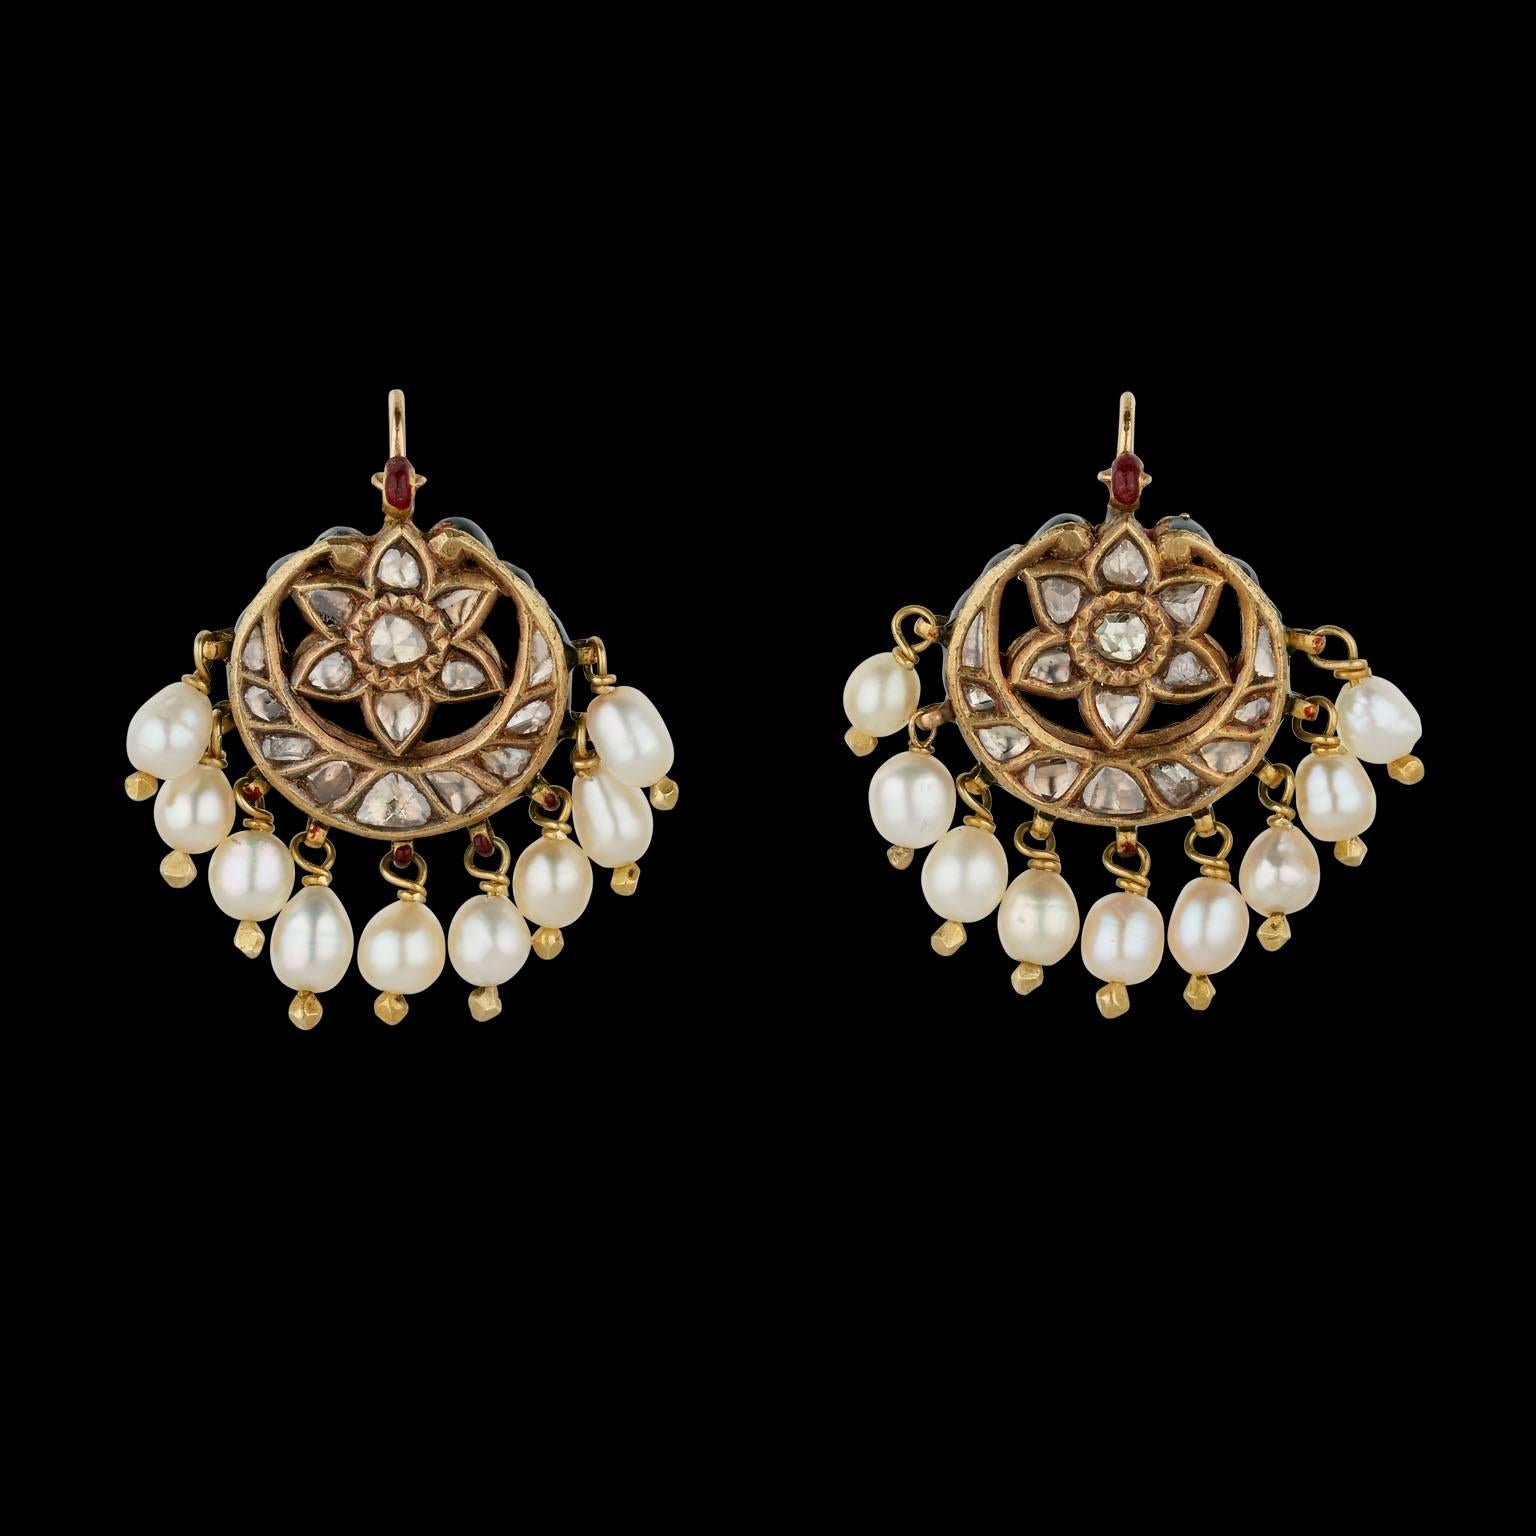 A Pair of Earrings
Mughal, North India
Early 19th Century

Fabricated from gold and set in kundan (traditional pure gold setting) technique with diamonds, strung with a fringe of nine natural pearls. The reverse is enamelled.